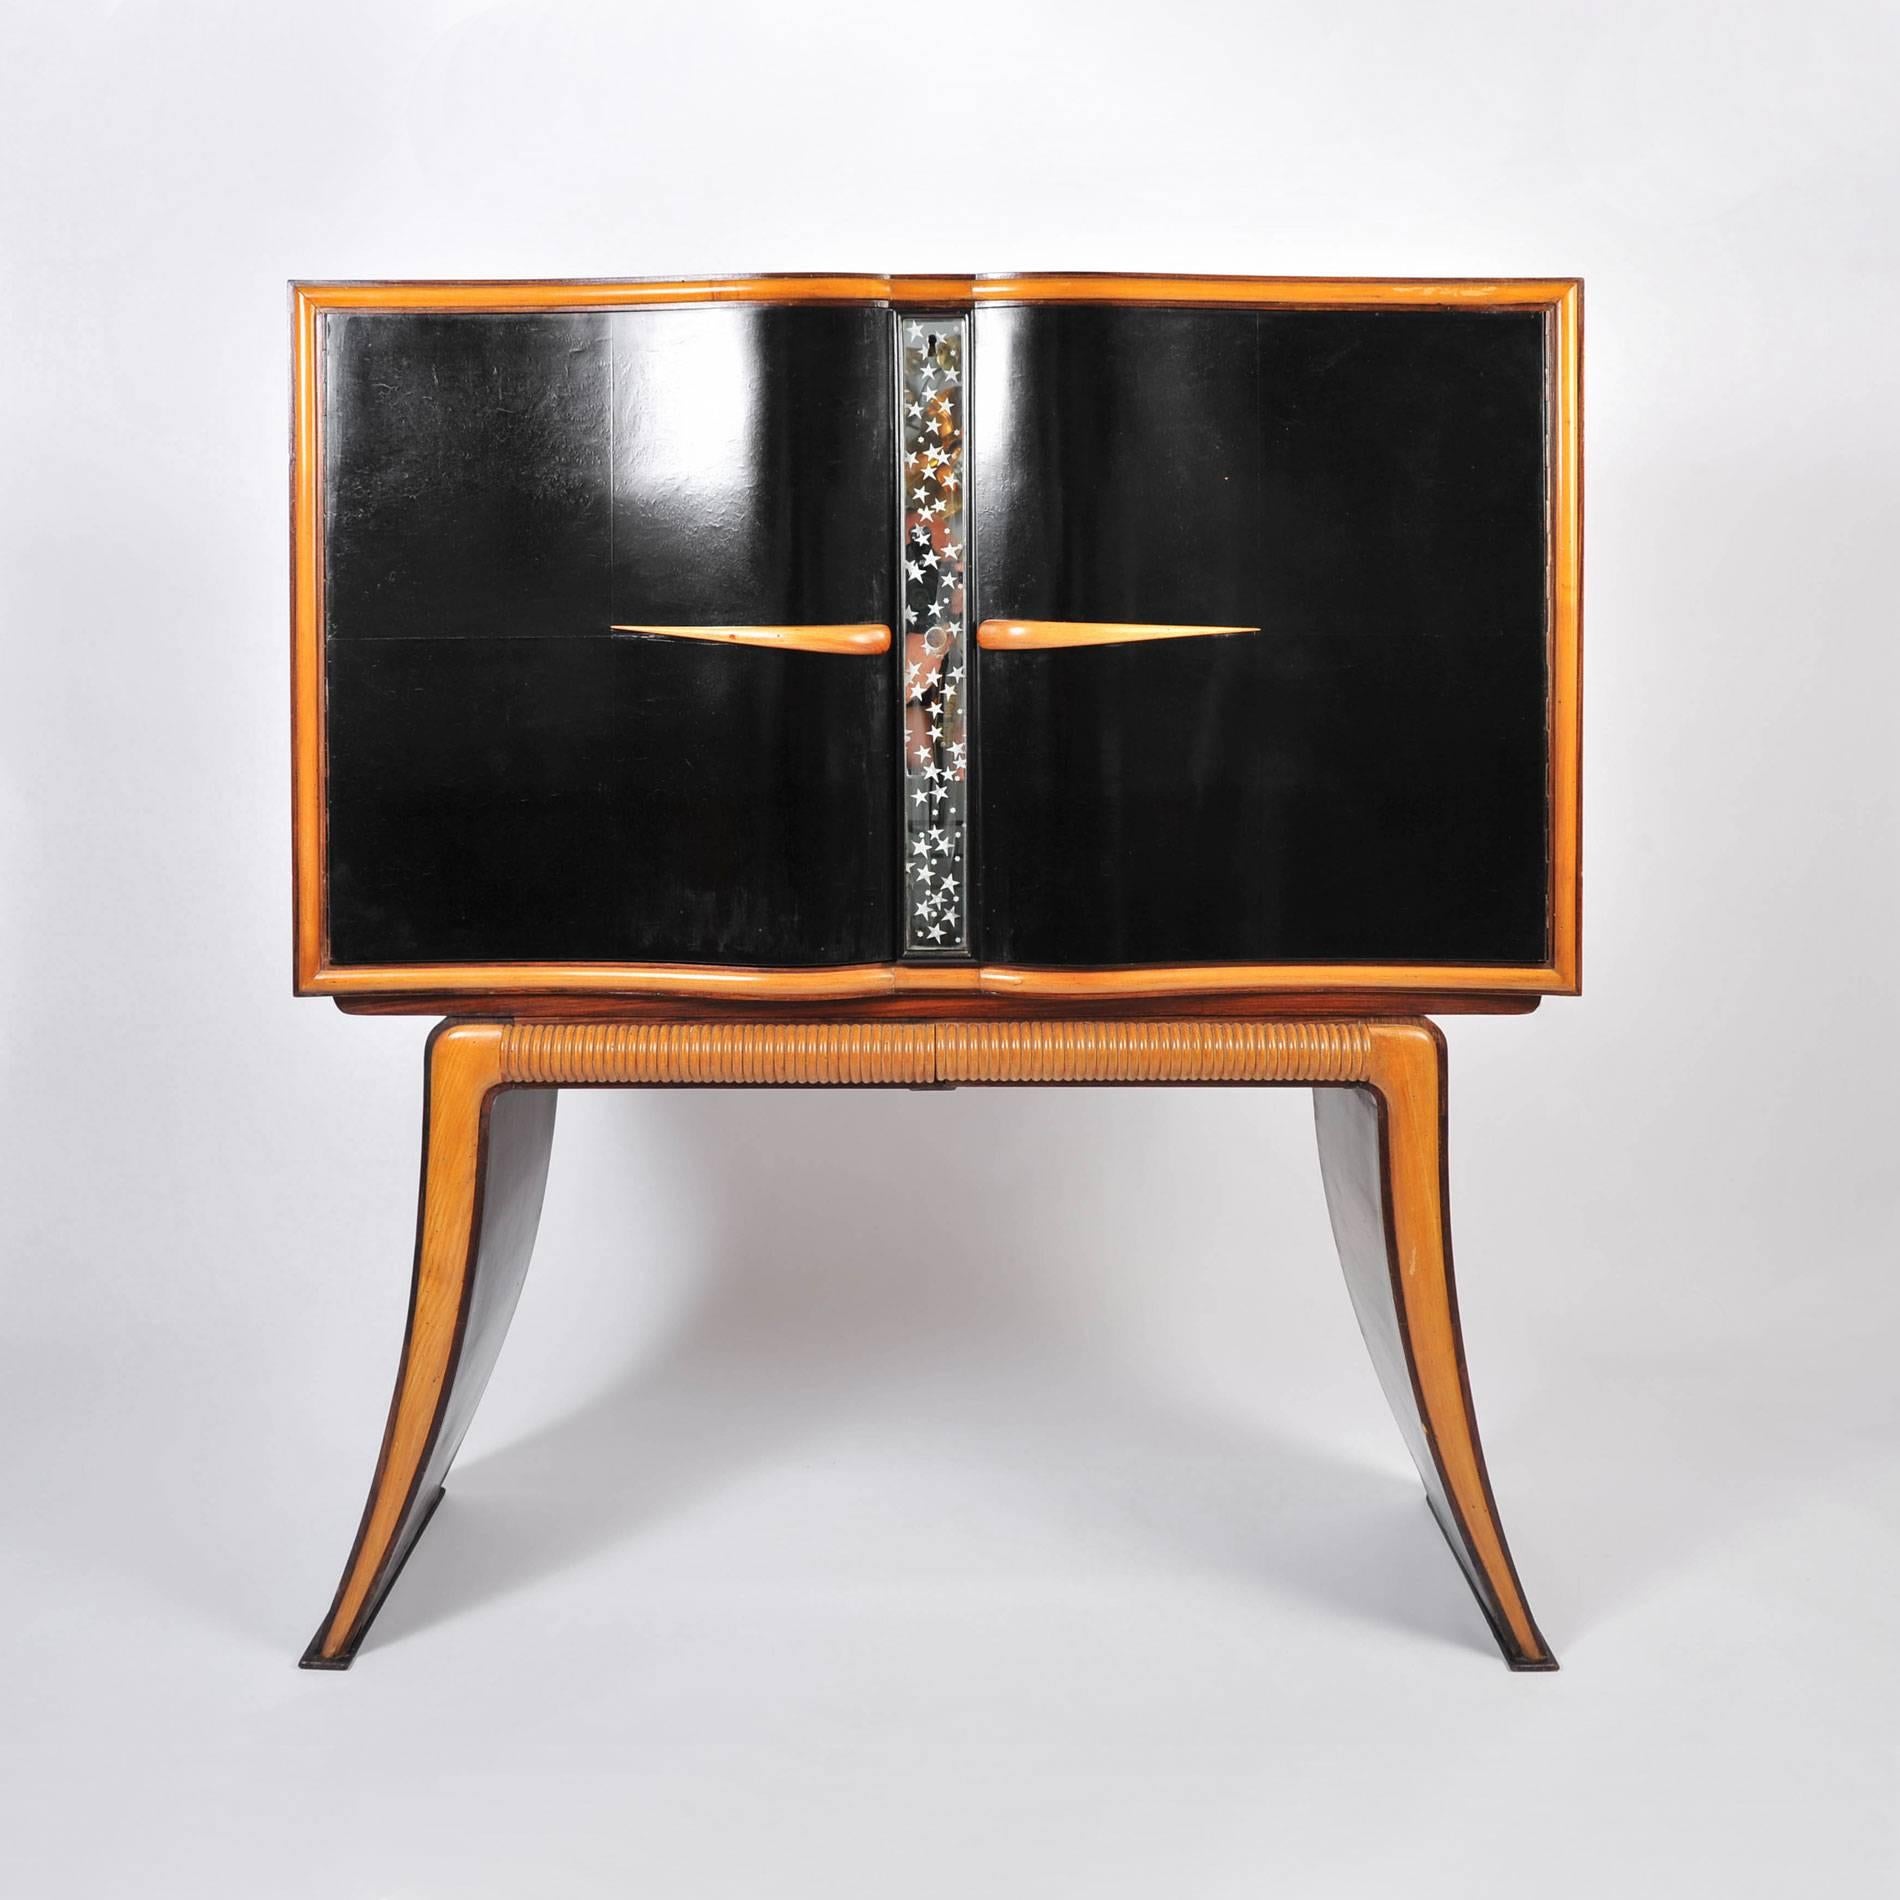 Spectacular drinks cabinet with dark mahogany doors opening to a dazzling world of night stars and dancing ladies entwined in nature. Exterior ebonised fruitwood doors are detailed in veneered mahogany and separated by a starry mirrored panel.